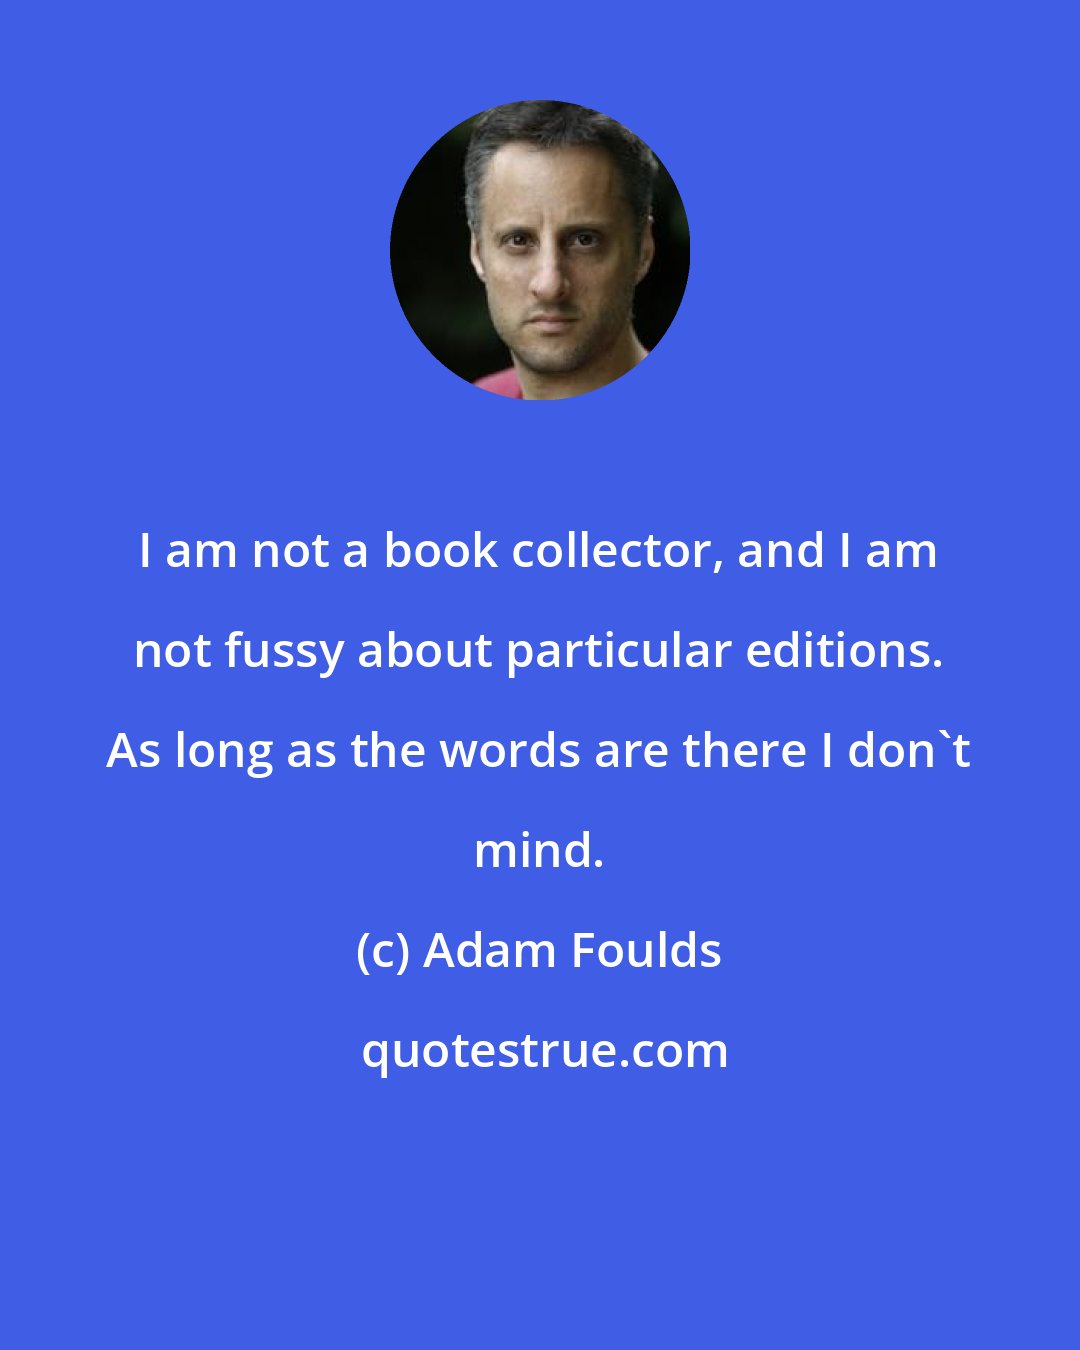 Adam Foulds: I am not a book collector, and I am not fussy about particular editions. As long as the words are there I don't mind.